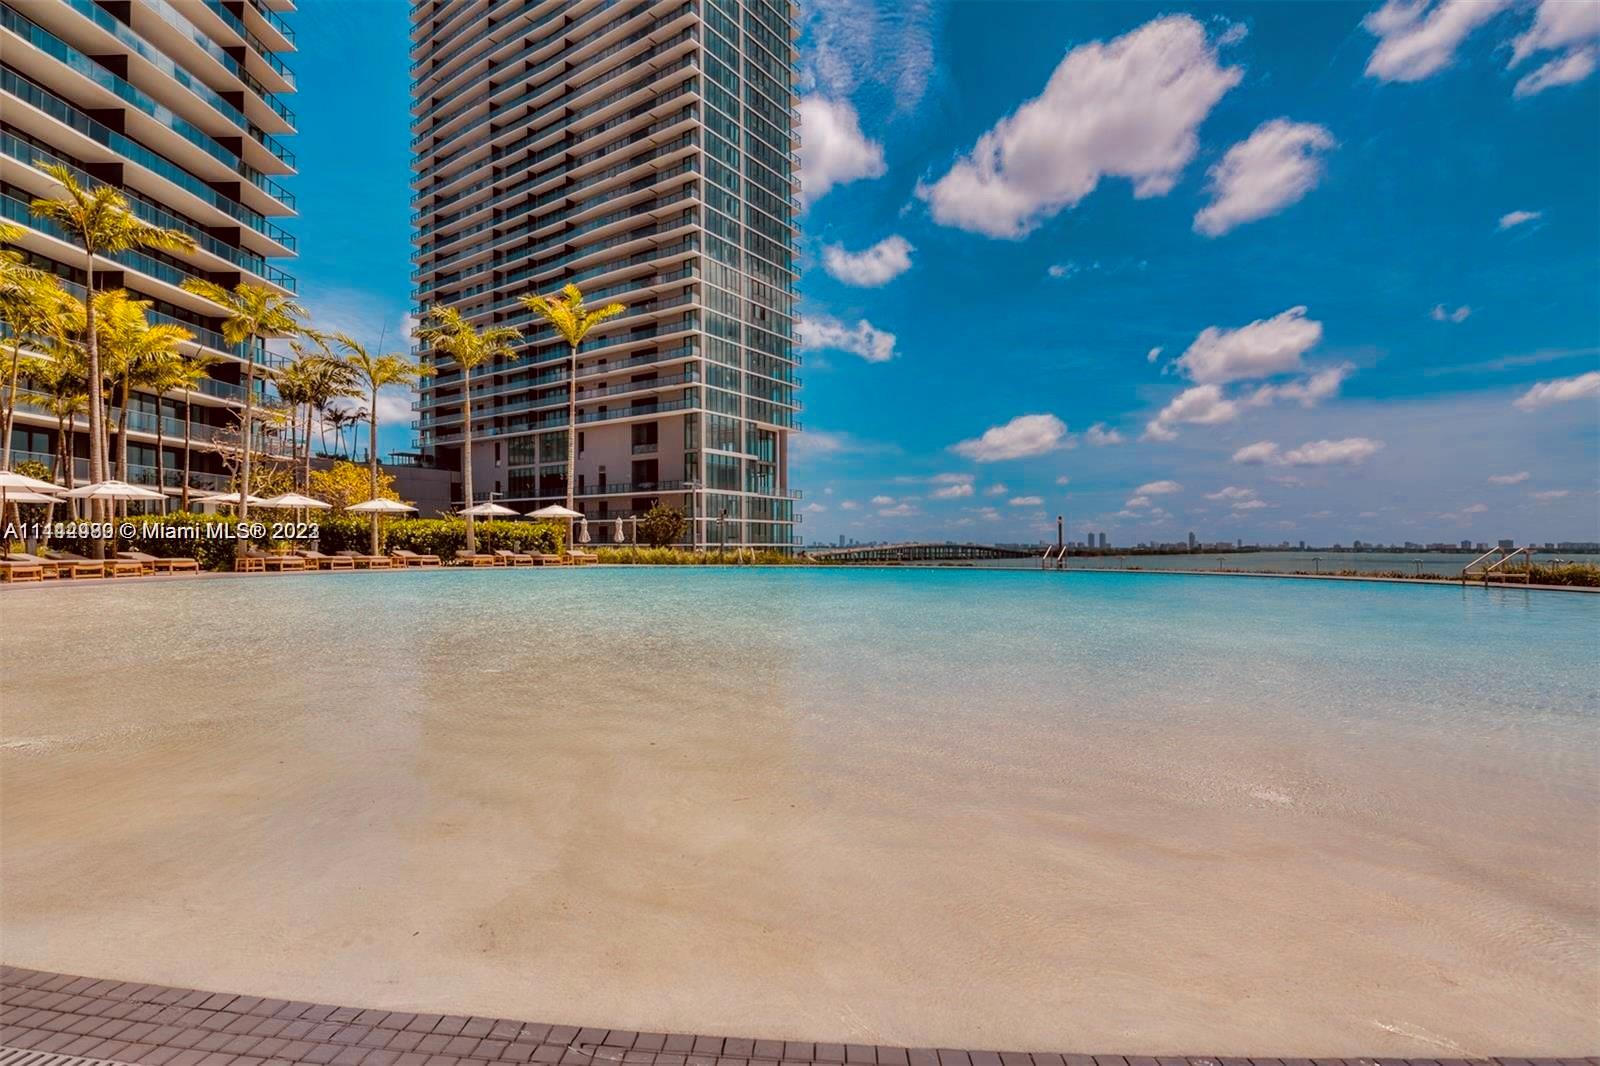 Amazing 4bed 4.5baths + Den, corner unit with private elevator entry. Open layout, top-of-the-line finishes, Italian Ceramic & tile floors, custom closets, and endless direct bay and Miami Beach views. Shades and blackouts throughout the unit. Enjoy the ultimate lifestyle with gorgeous amenities, including a resort-style pool, residents lounge, wine-tasting room, full-service gym/spa, children's playroom, tennis court, bowling, and much more. Excellent Location! 15 from Miami Beach, 8 min from Wynwood, Midtown, and Design District, and 15 mins from Miami airport. Unit is currently rented until 6/24 with a 90 days vacancy claus. Monthly rent $8,500.